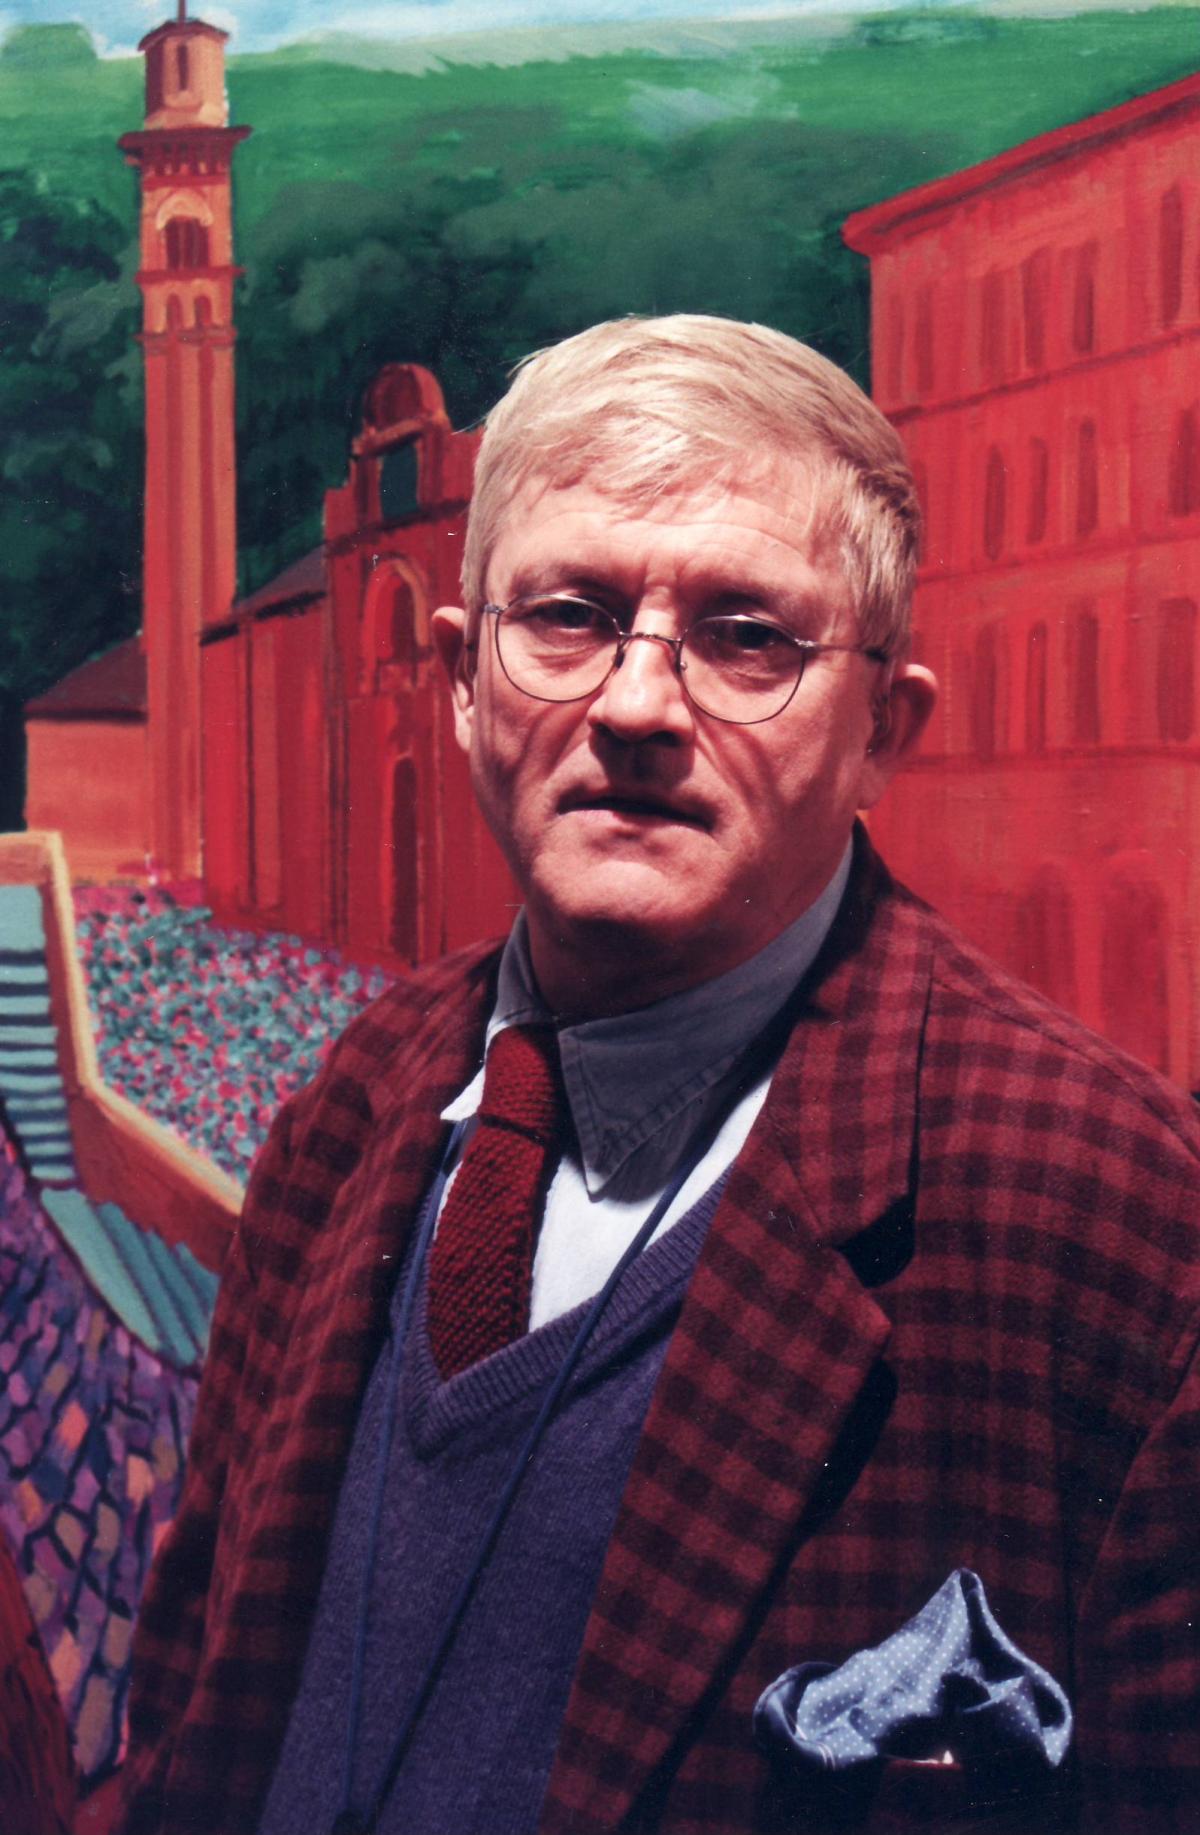 Hockney with a piece of his work in 1997